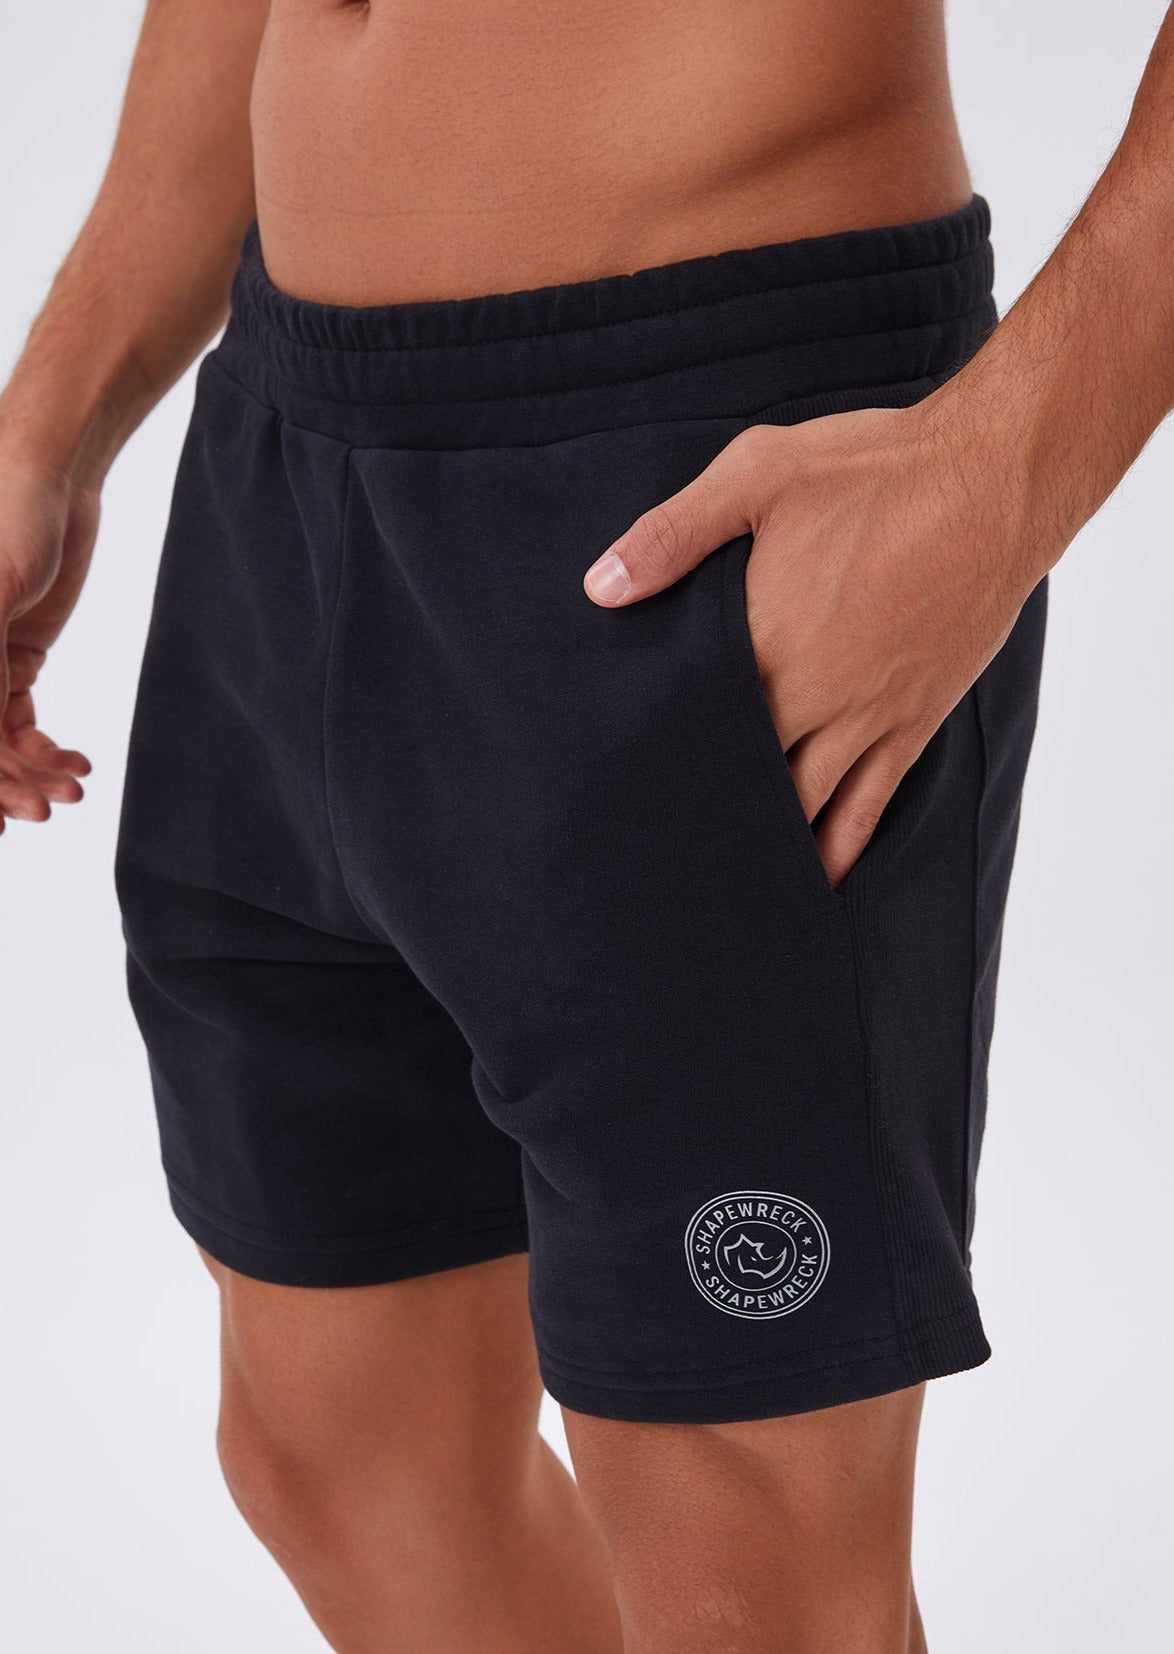 SLIM FIT Shorts PRIMARY SHORT - SPECIAL EDITION IN BLACK